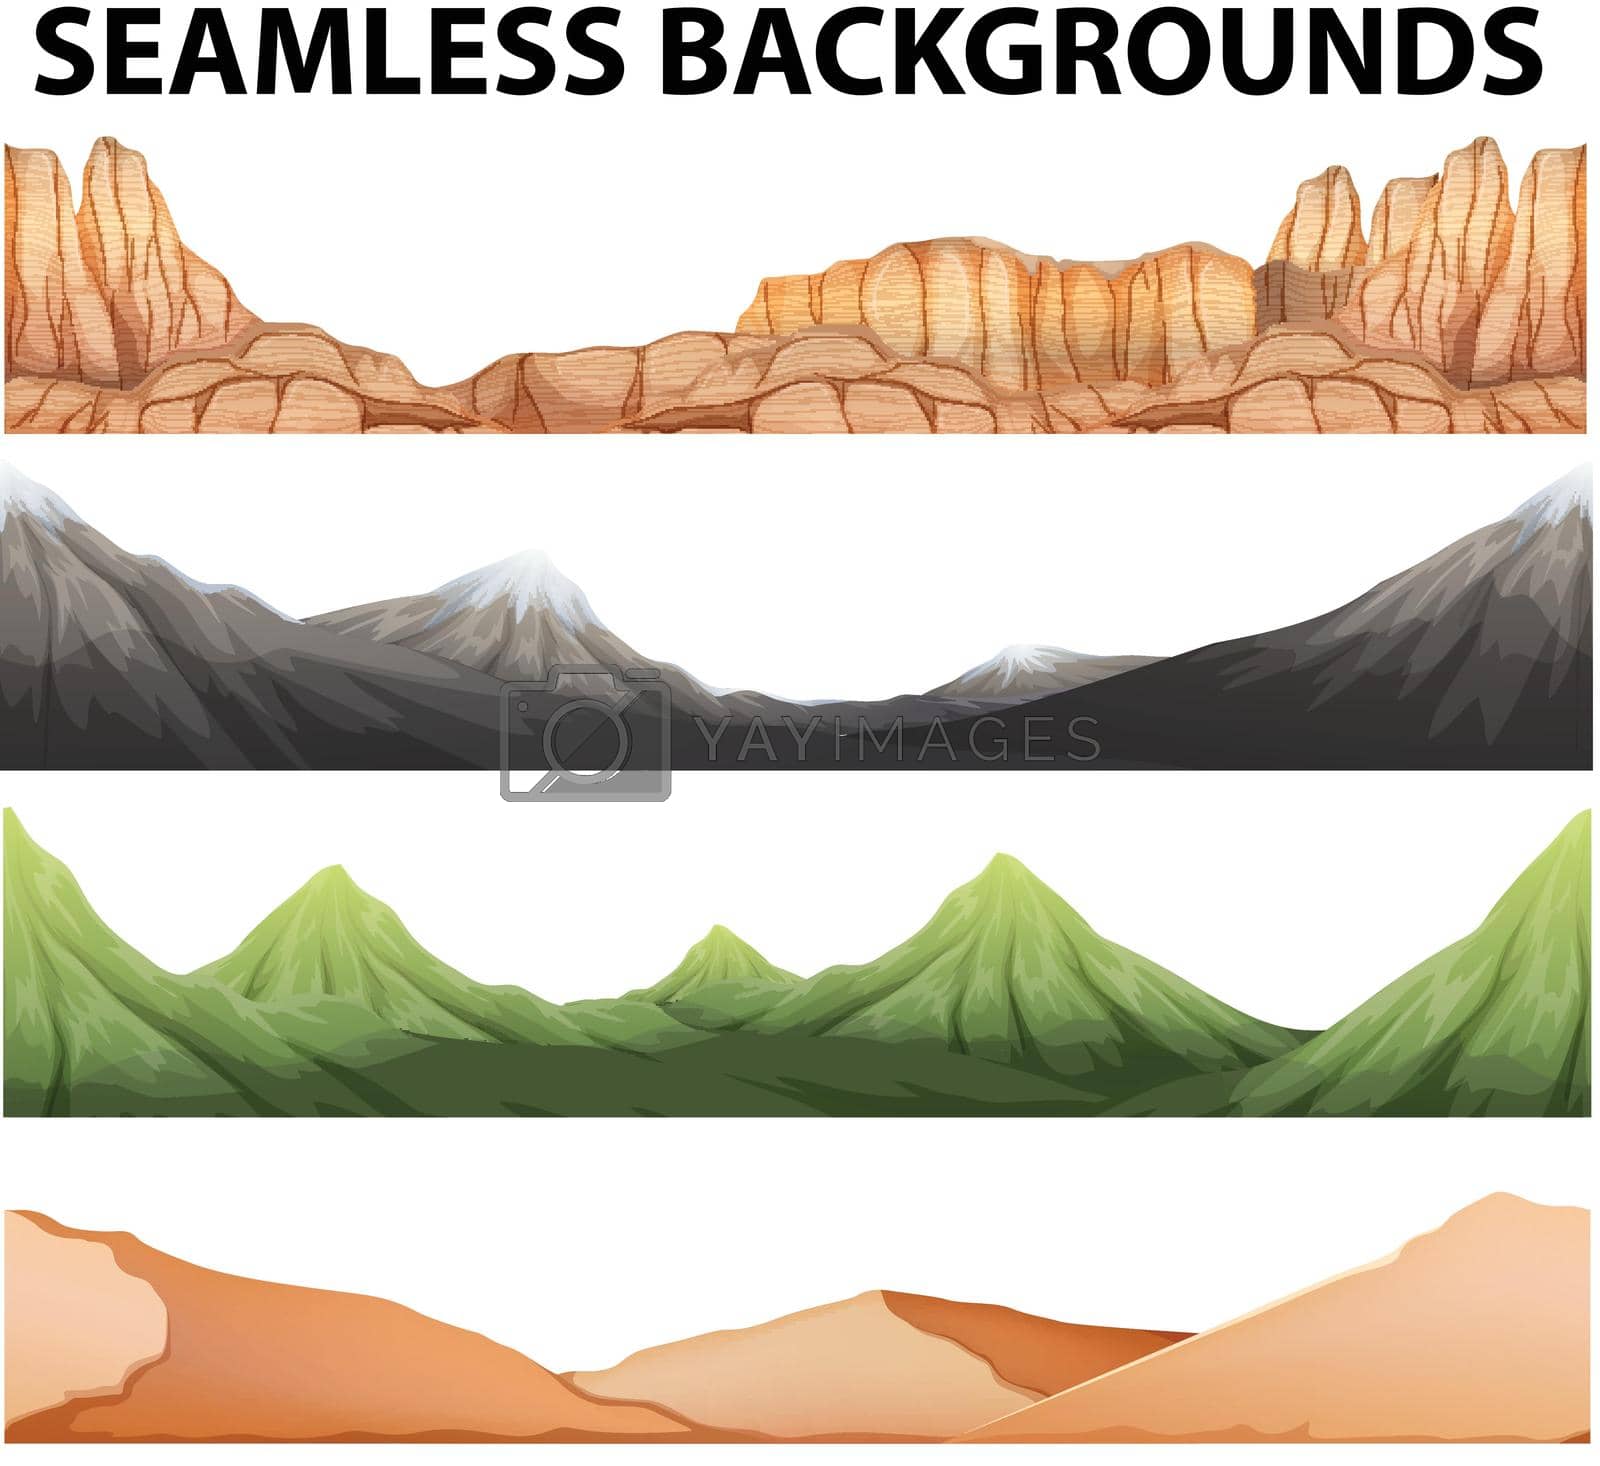 Seamless backgrounds with different types of mountains illustration